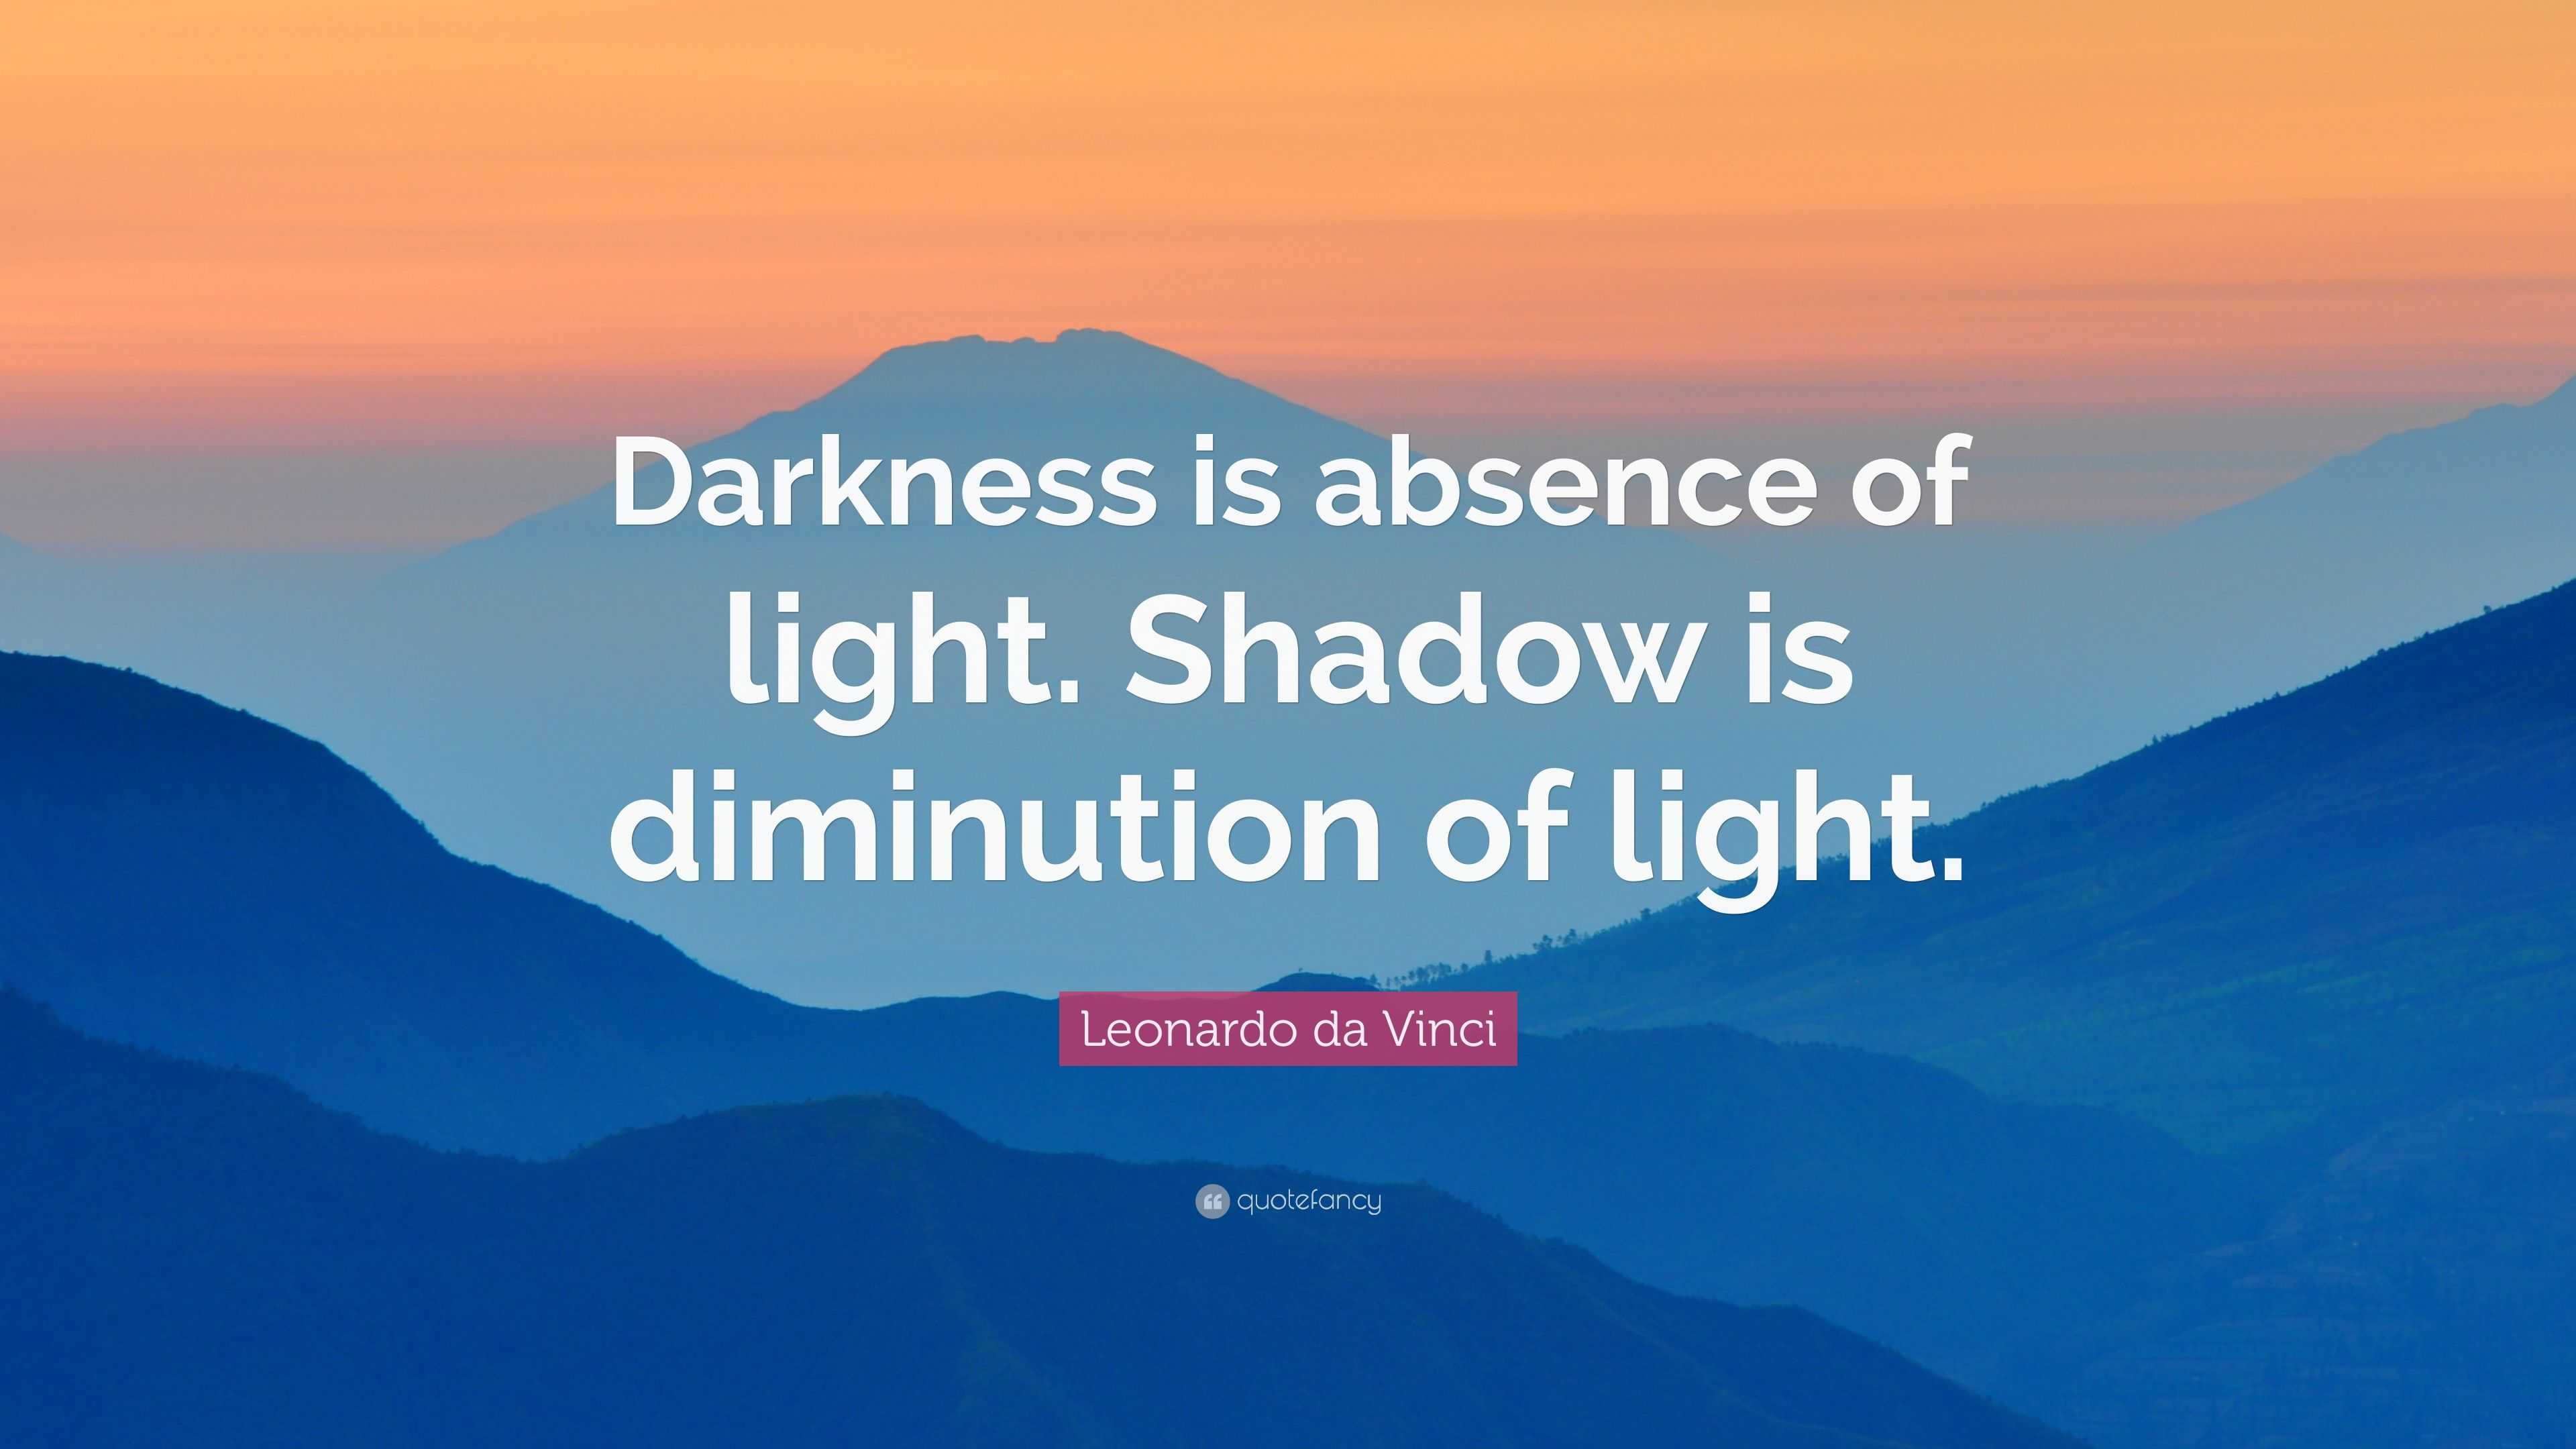 is darkness the absence of light